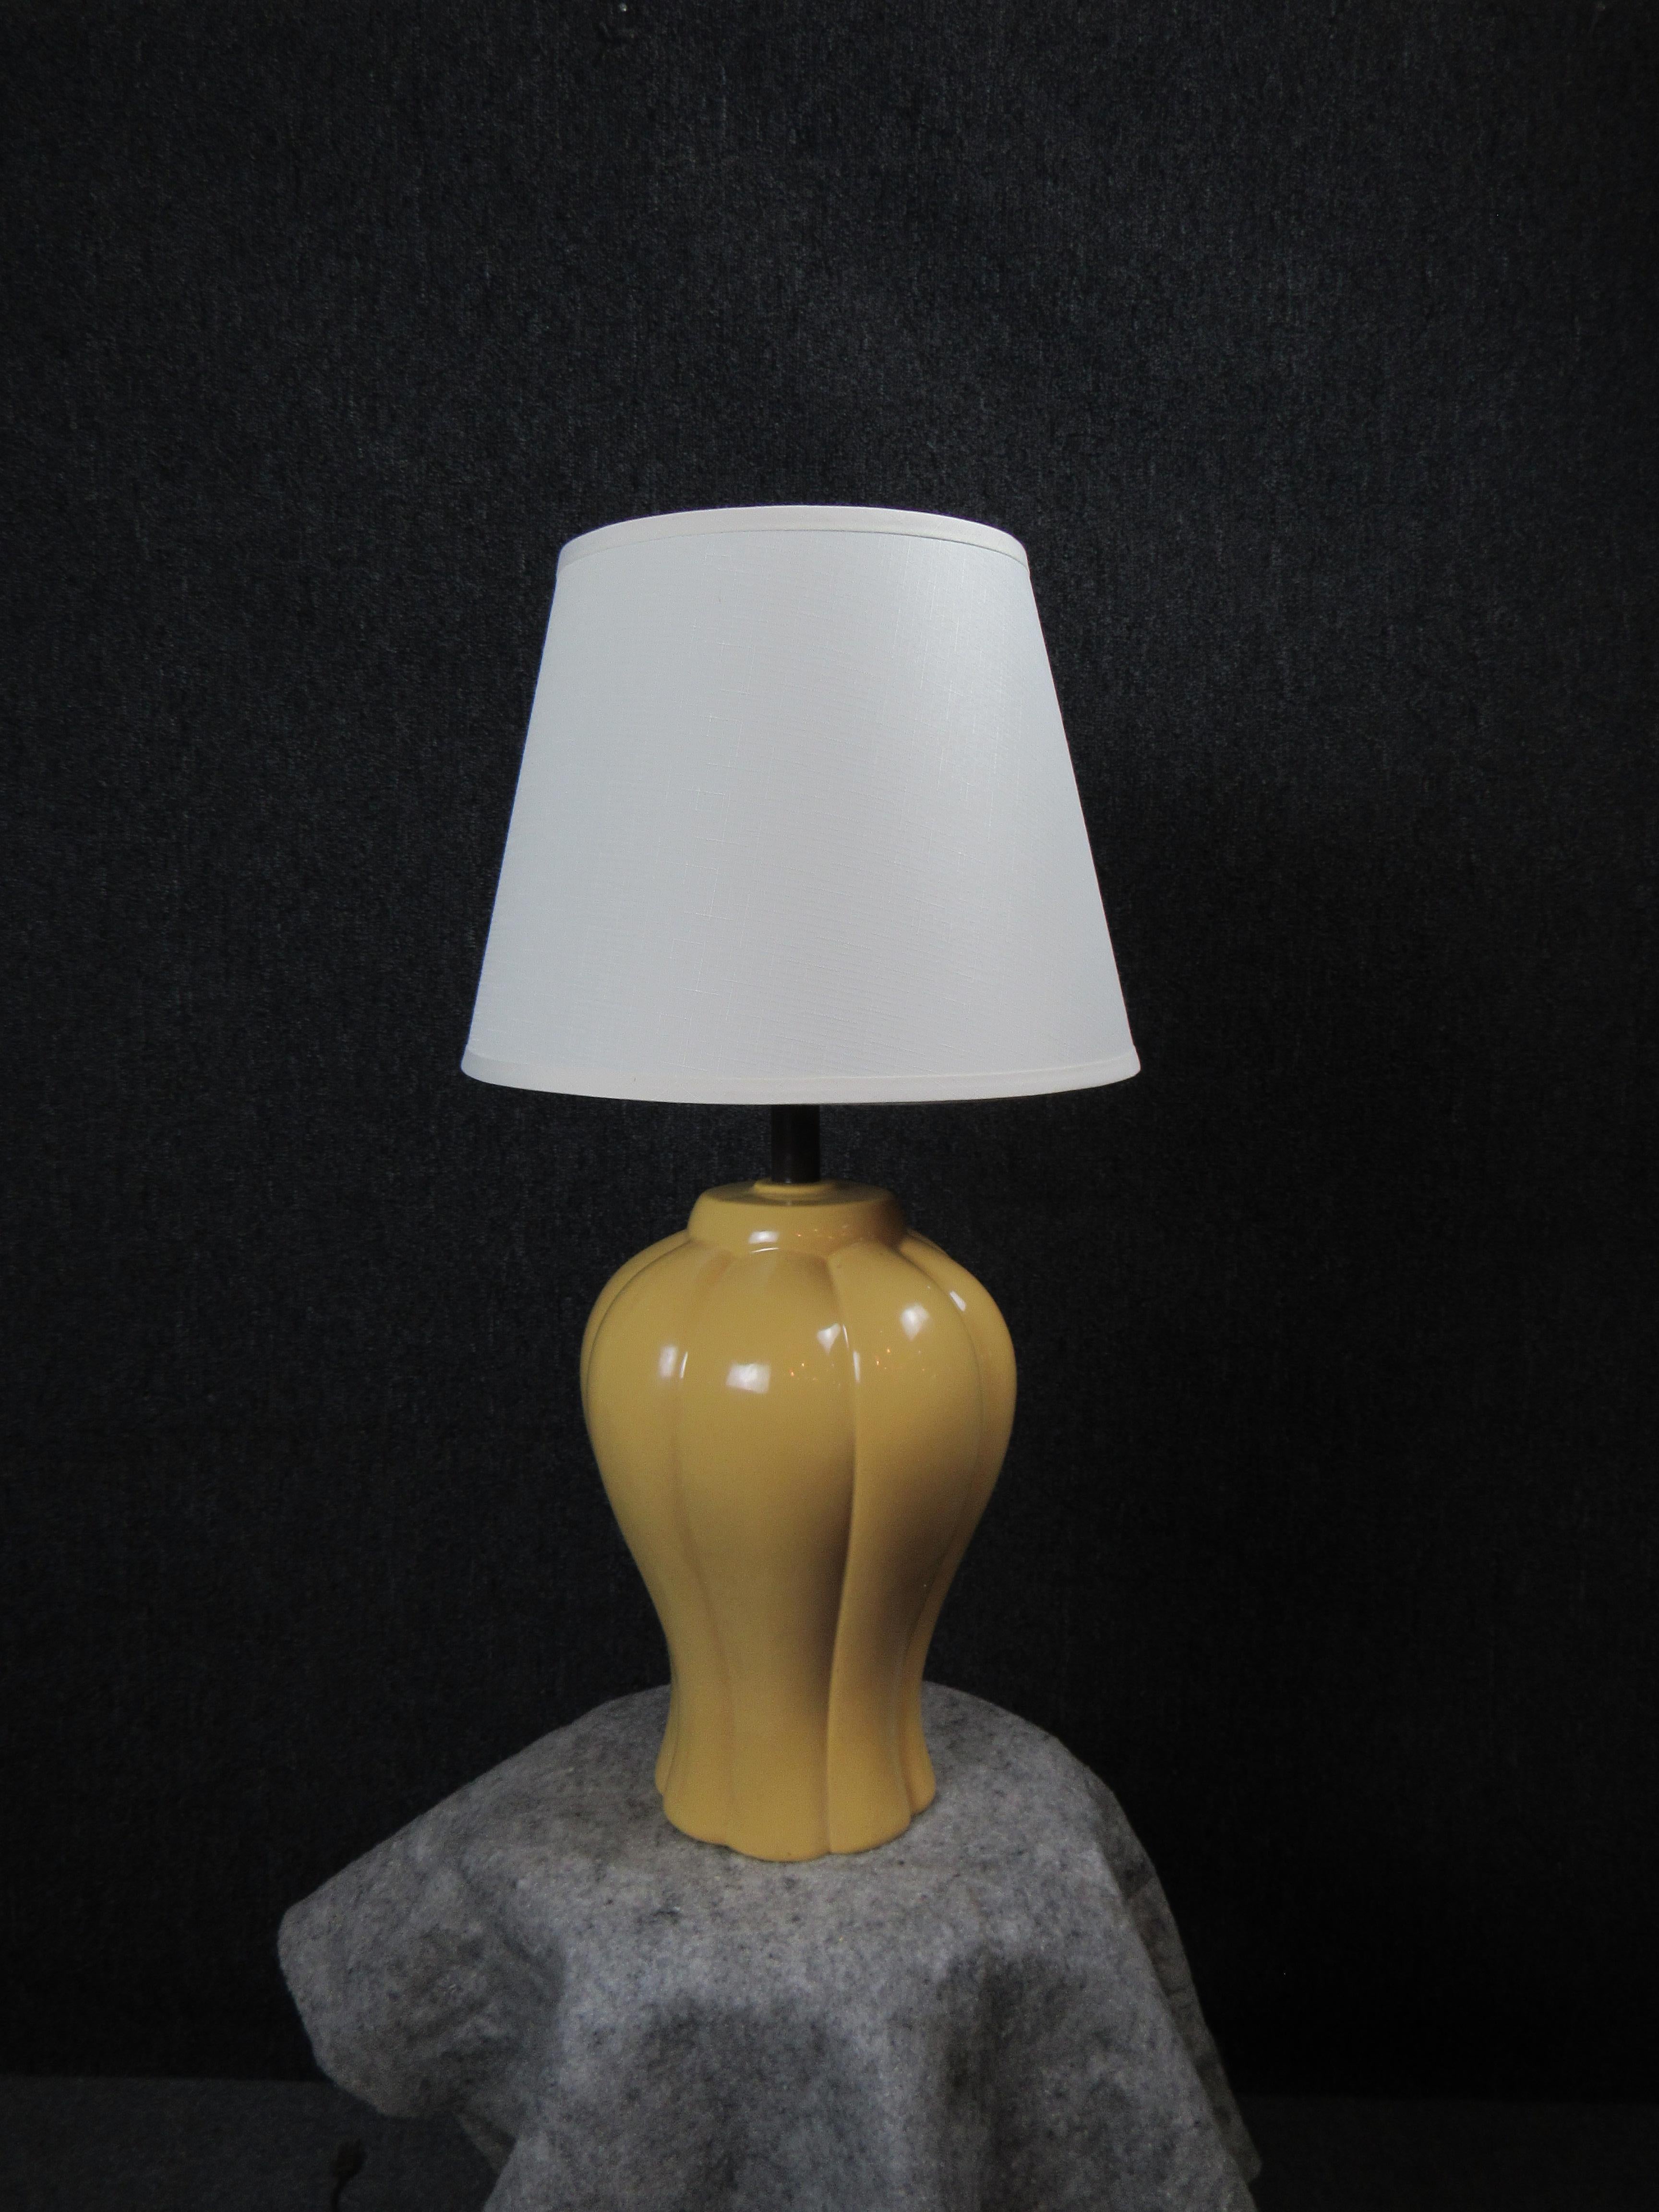 This lovely mid-century vintage table lamp is sure to lighten up any room! Featuring a curvaceous ceramic form in a charming mustard yellow hue, it's simplicity is sure to mesh seamlessly with a wide variety of styles, from retro to modern! Please